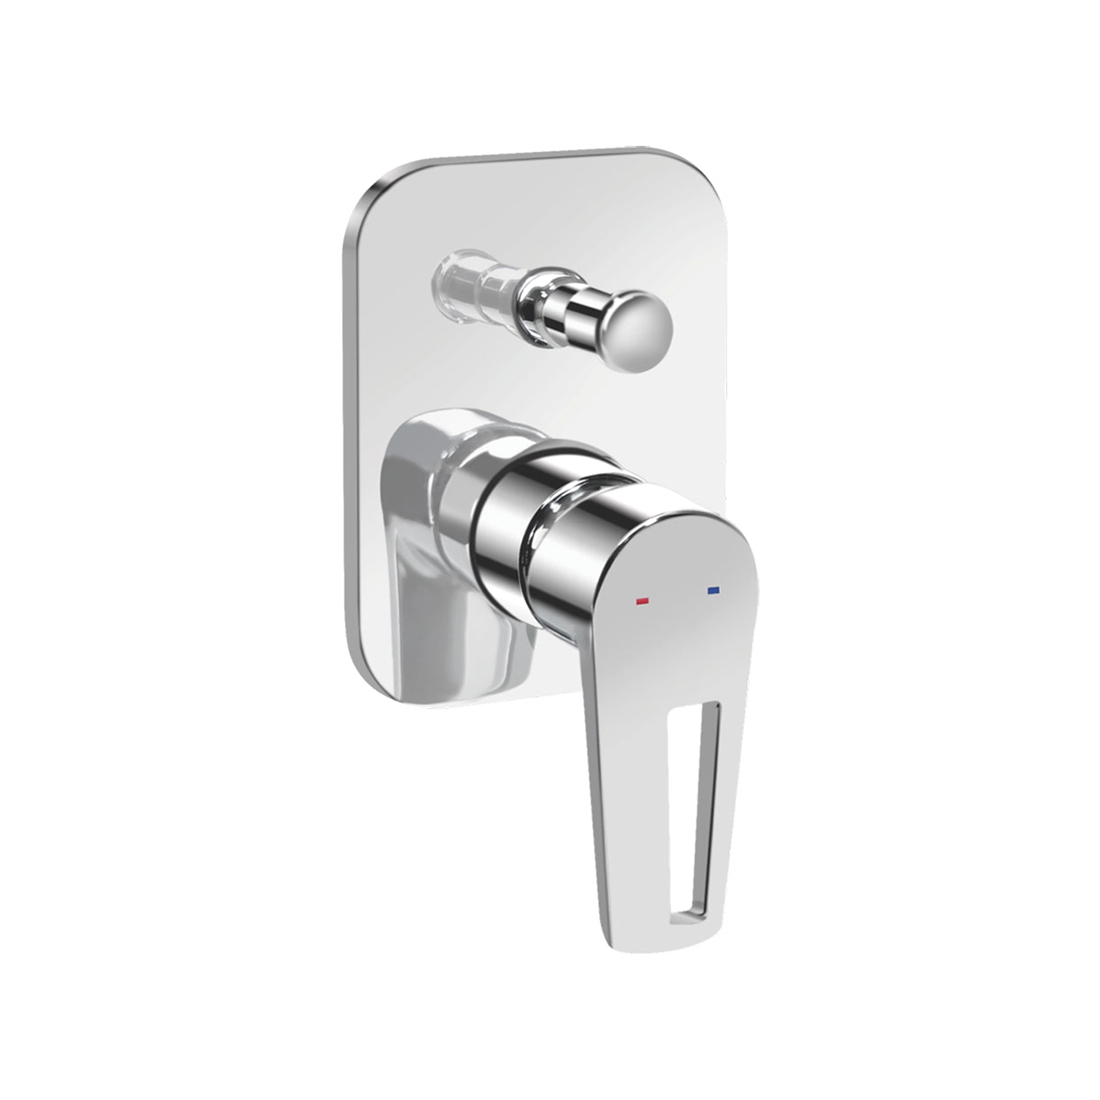 Kerovit Chime KB911036 Single Lever 3-Inlet Concealed Bath and Shower Mixer Trim